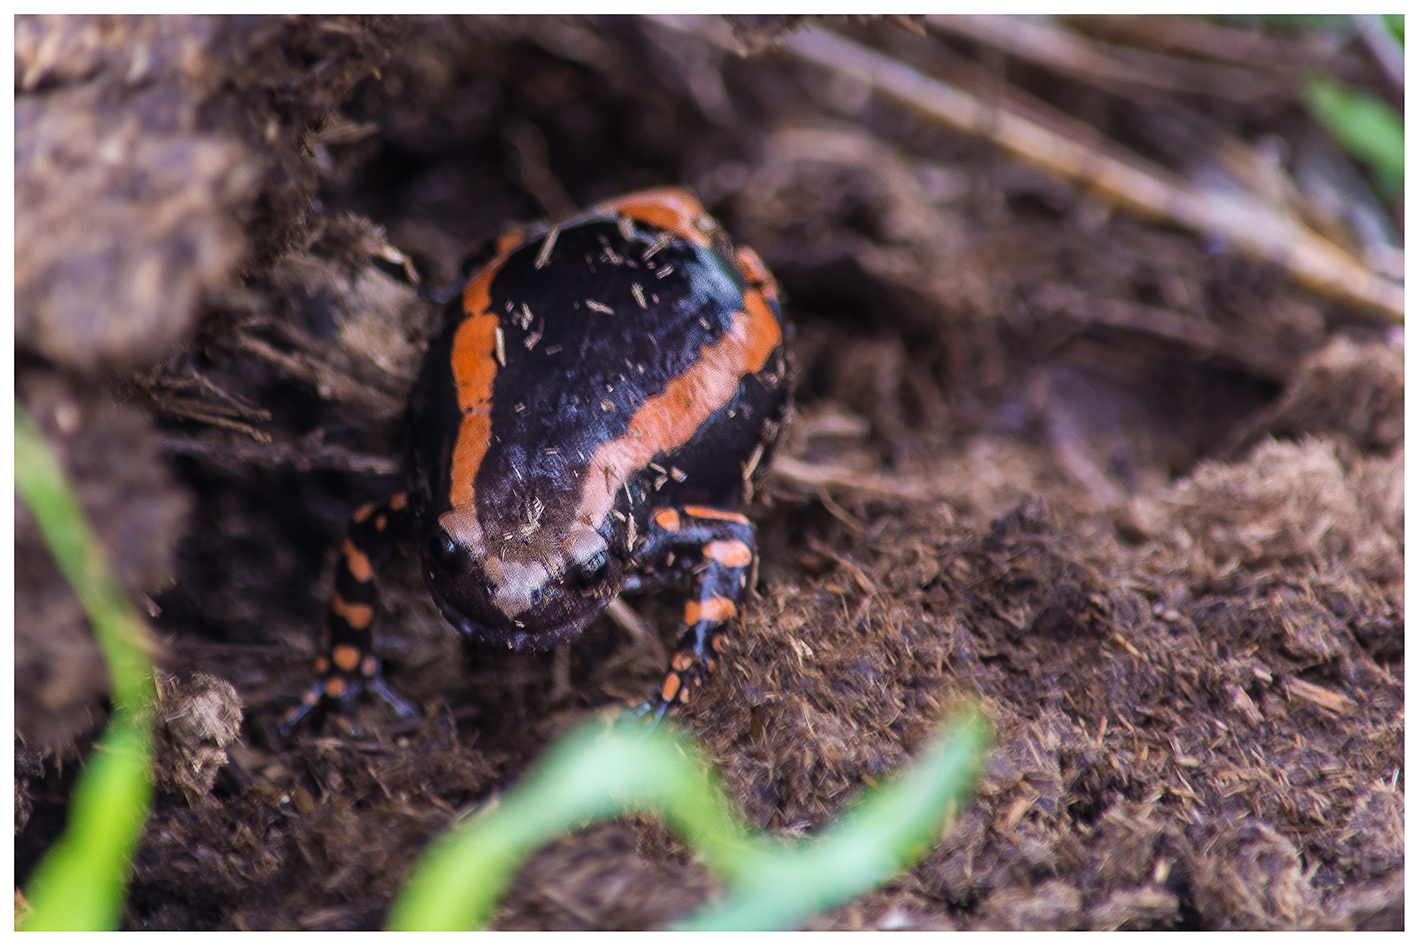 Rubber Banded Frog in Hippo dung, South Africa